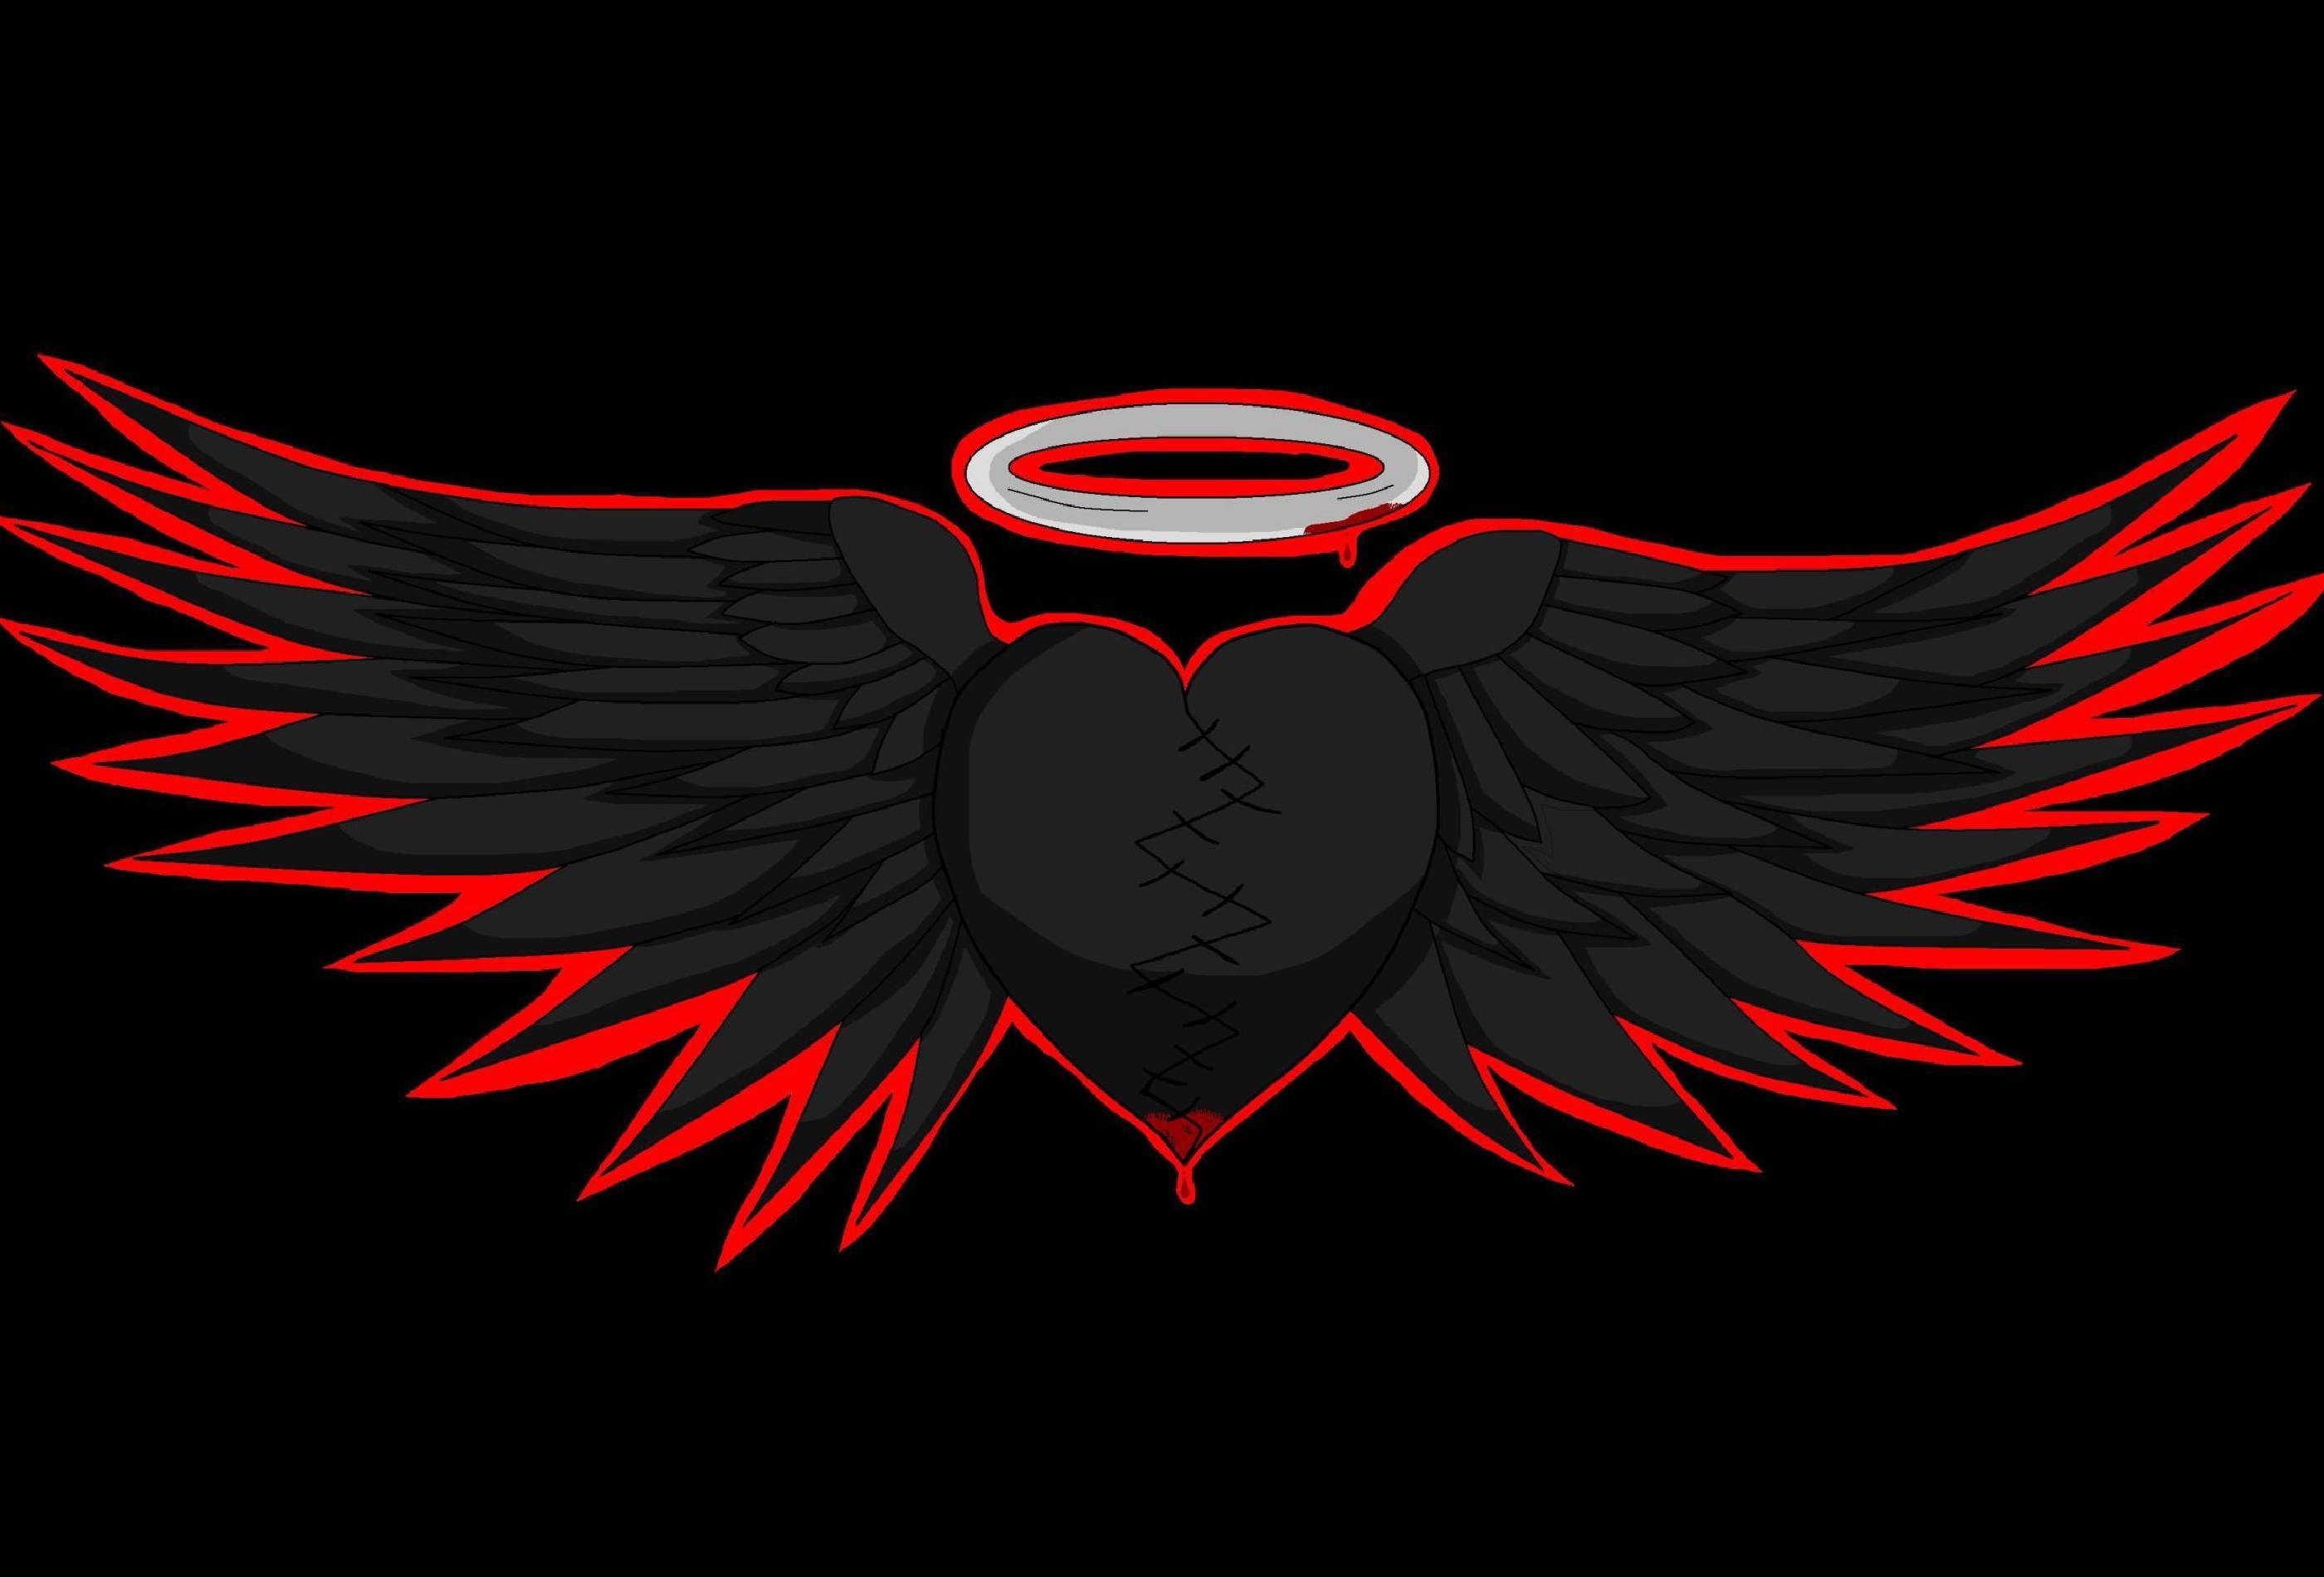 Black Hearted Angel Wings Wallpaper Data Src Red - Wings Images Hd Download  - 2800x1900 Wallpaper 